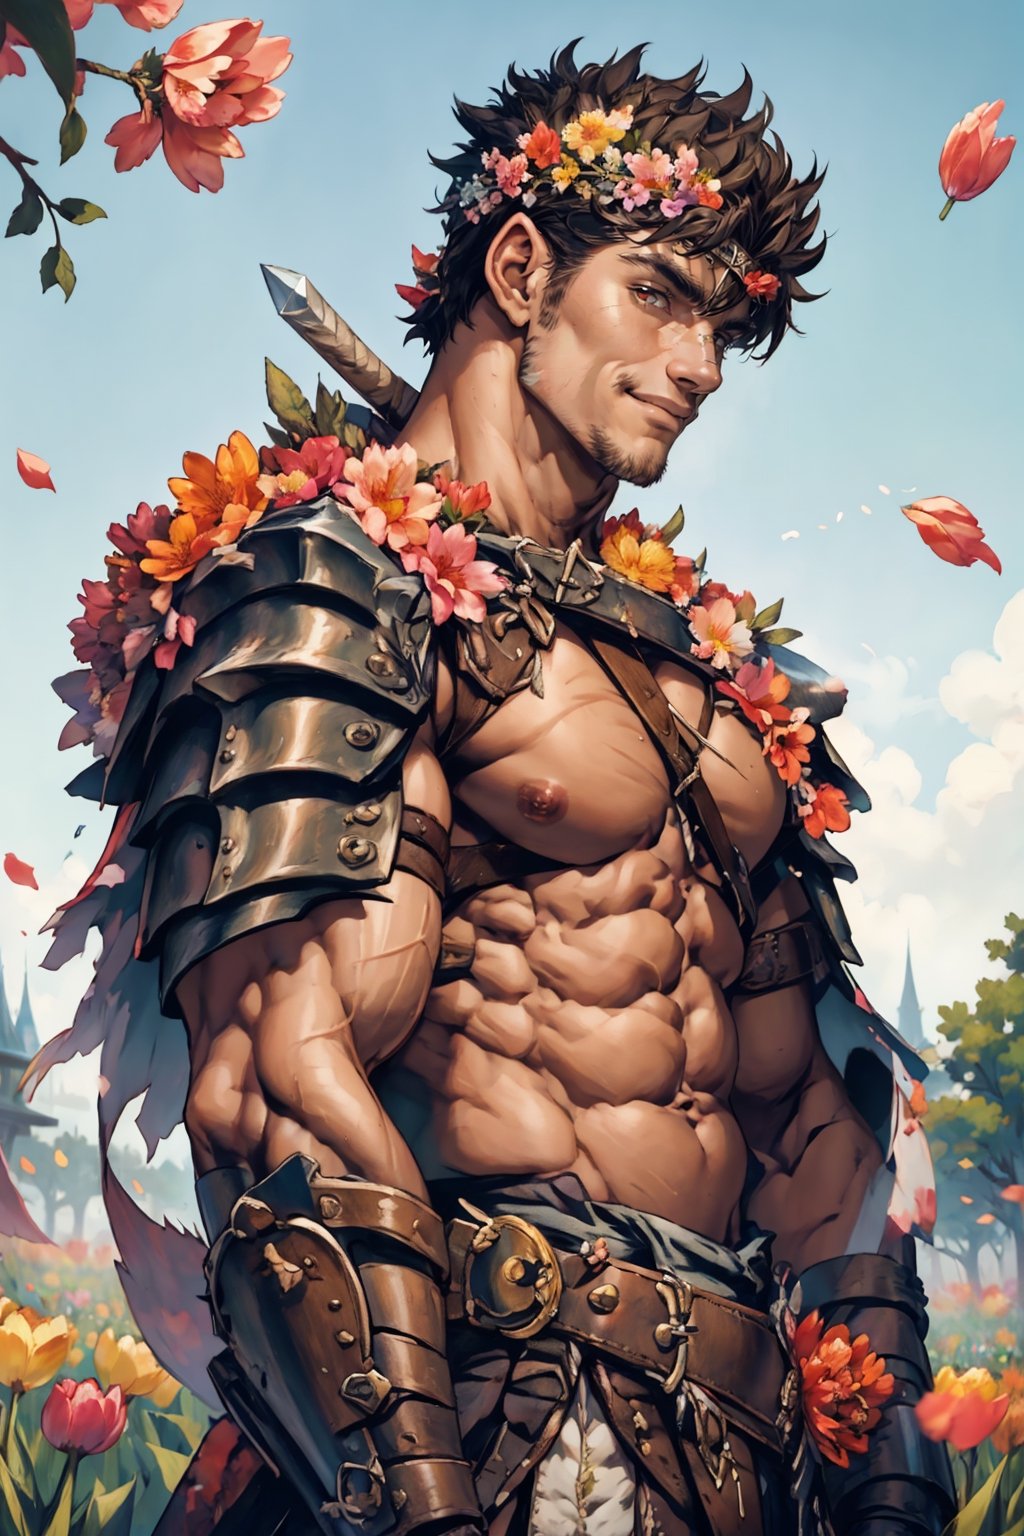 flower4rmor, flower barbarian armor, front view image of "Guts" from Berserk wearing flower barbarian armor, in a field of tulips, sunny summer day, bare chest, very hairy chest, pectoral muscles short hair, flower crown on his head, flower petals in the wind, facing the viewer, turned towards the viewer, happy expression, smiling at the viewer, expressive brown eyes, harness, realistic, masterpiece, high quality, intricate details, detailed background, depth of field, mature, 40 years old, detailed face, Pectoral Focus